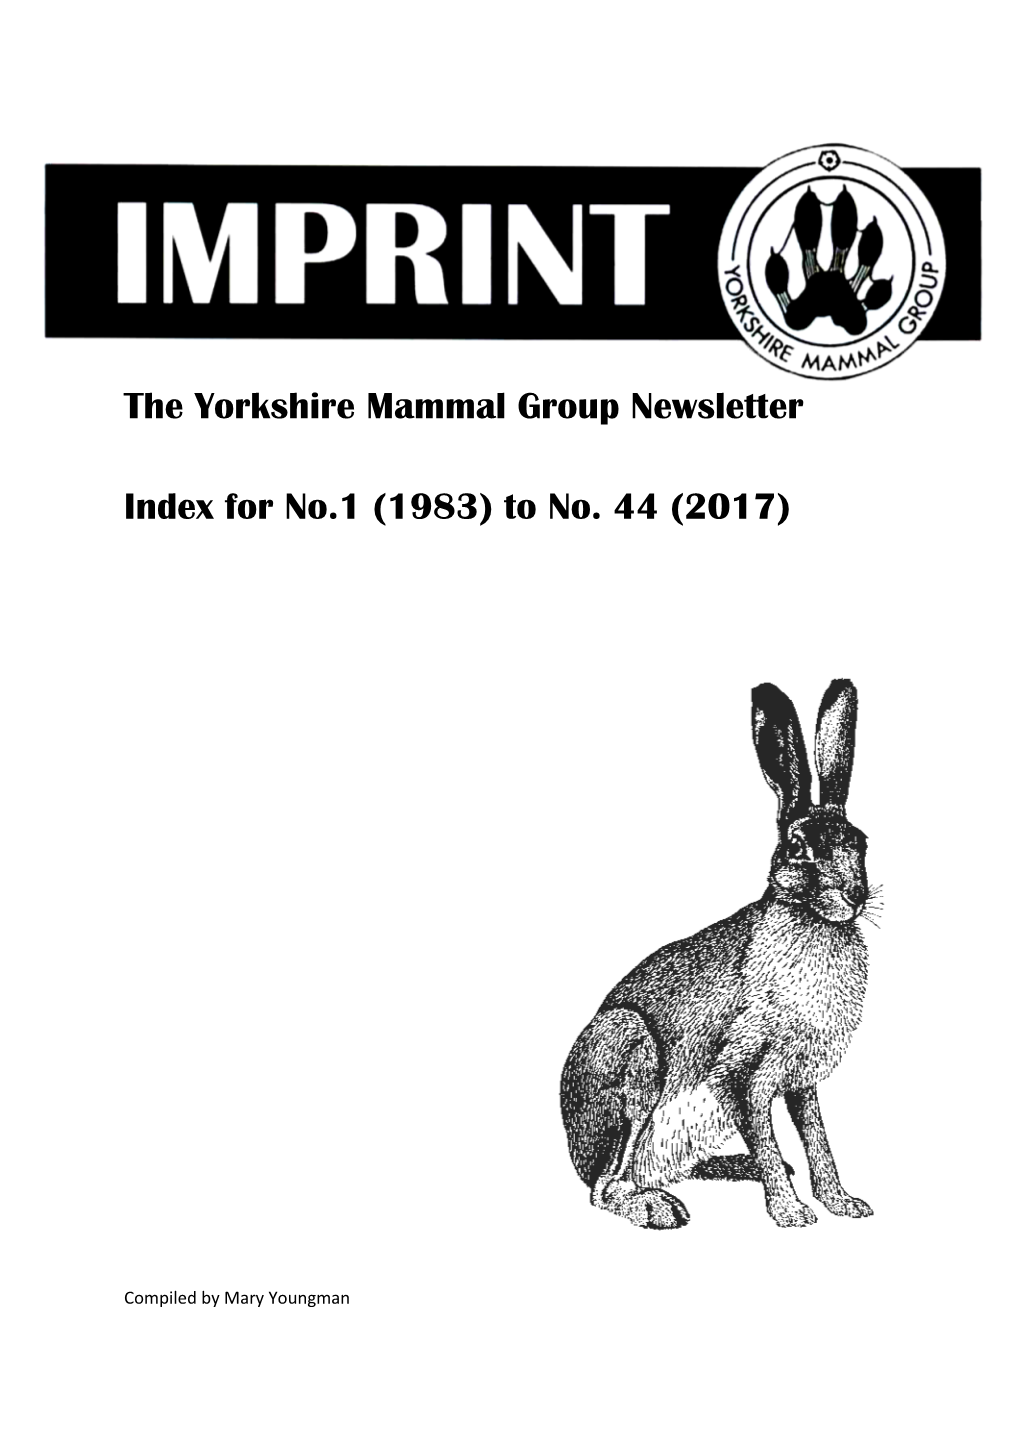 The Yorkshire Mammal Group Newsletter Index for No.1 (1983) To